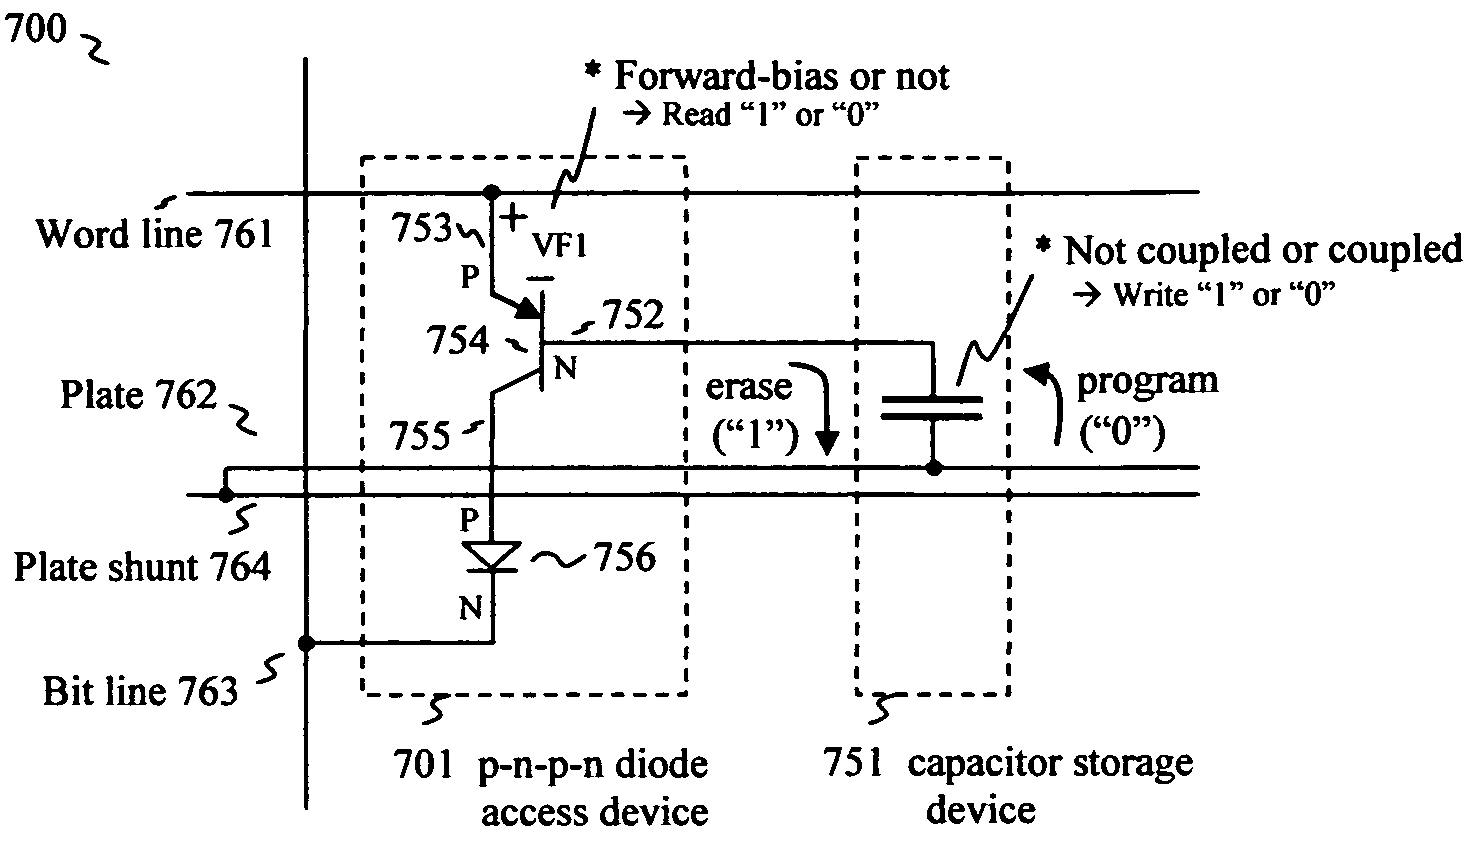 Vertical capacitor memory cell and its applications